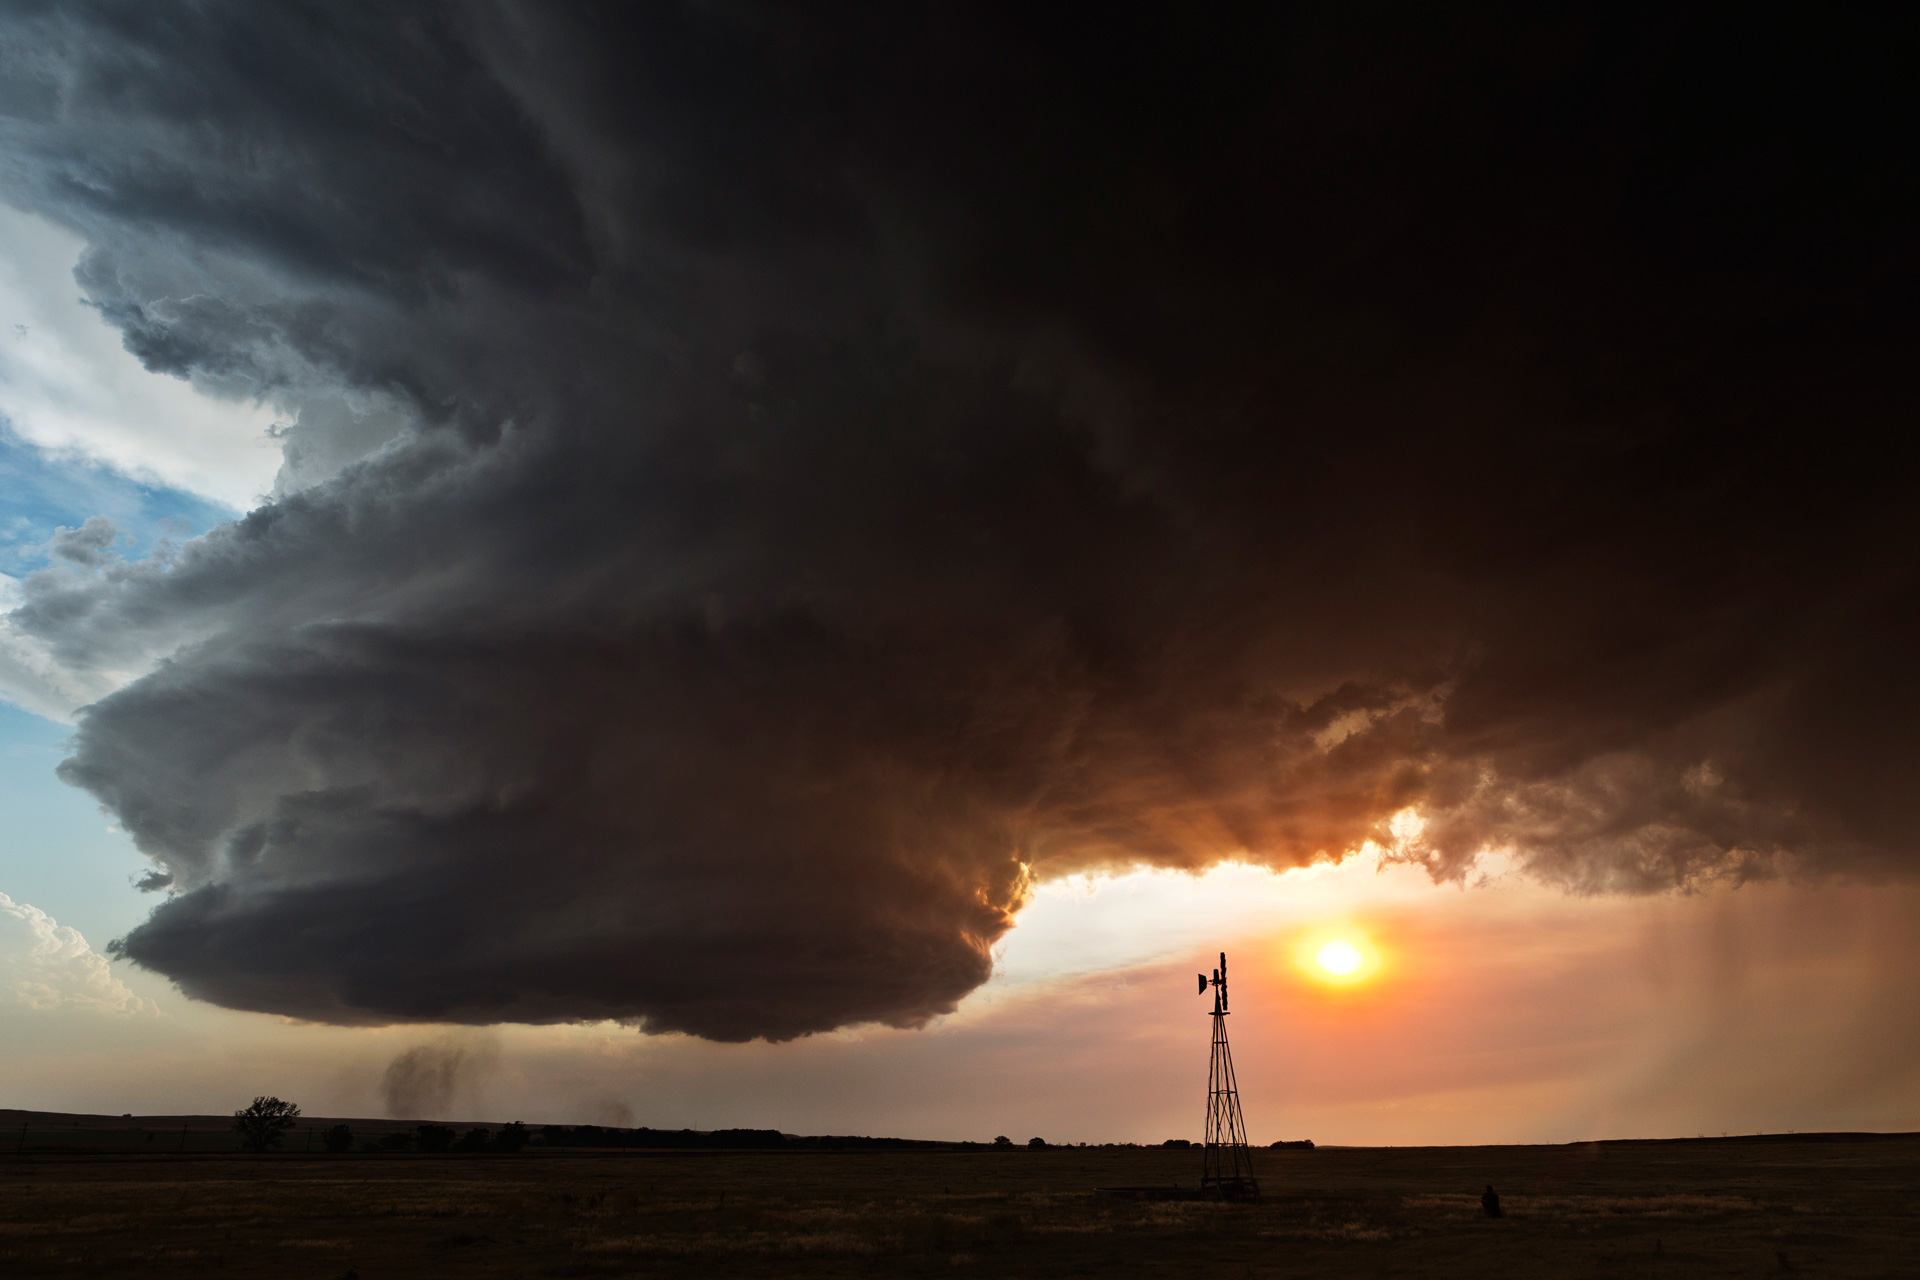 Supercell with Windmill, Chappell, NE, 22 June 2012 / Photo: Camille Seaman